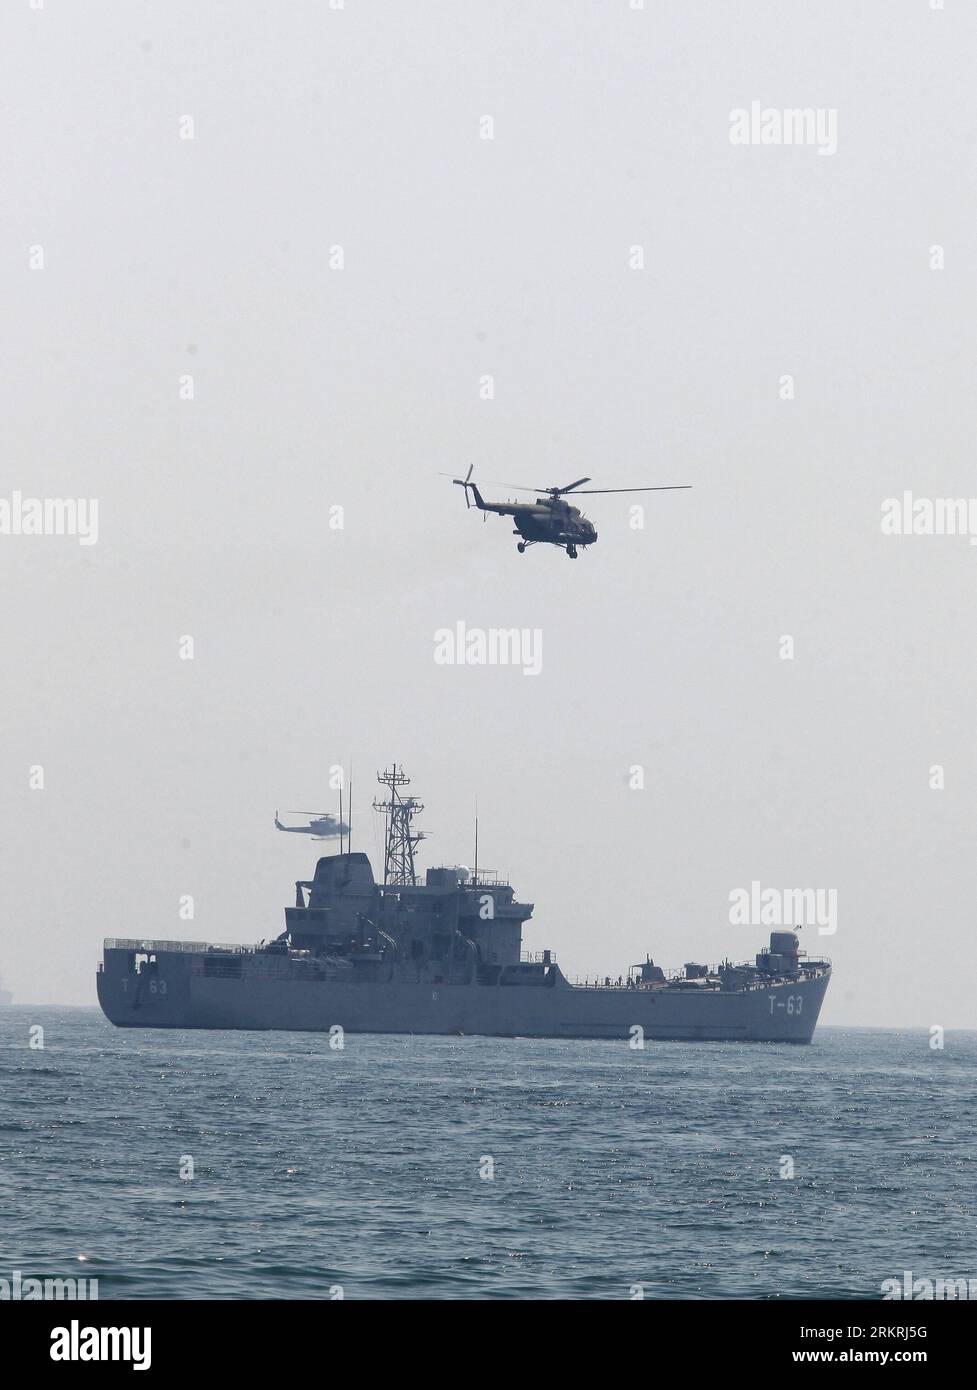 Bildnummer: 58254368  Datum: 17.07.2012  Copyright: imago/Xinhua (120718) -- PUERTO CABELLO, July 18, 2012 (Xinhua) -- Helicopters, ships and members of the Venezuelan Army take part in a rehersal prior to the navy parade, in Puerto Cabello, Carabobo state, Venezuela, on July 17, 2012. Venezuelan Army will celebrate it s anniversary with 11 activities to commemorate the Maracaibo Lake naval battle and Simon Bolivar s birthday. (Xinhua/Juan Carlos Hernandez) (ctt) VENEZUELA-PUERTO CABELLO-MILITARY-REHEARSAL PUBLICATIONxNOTxINxCHN Politik Militär Marine Manöver Militärübung Übung xjh x0x premium Stock Photo